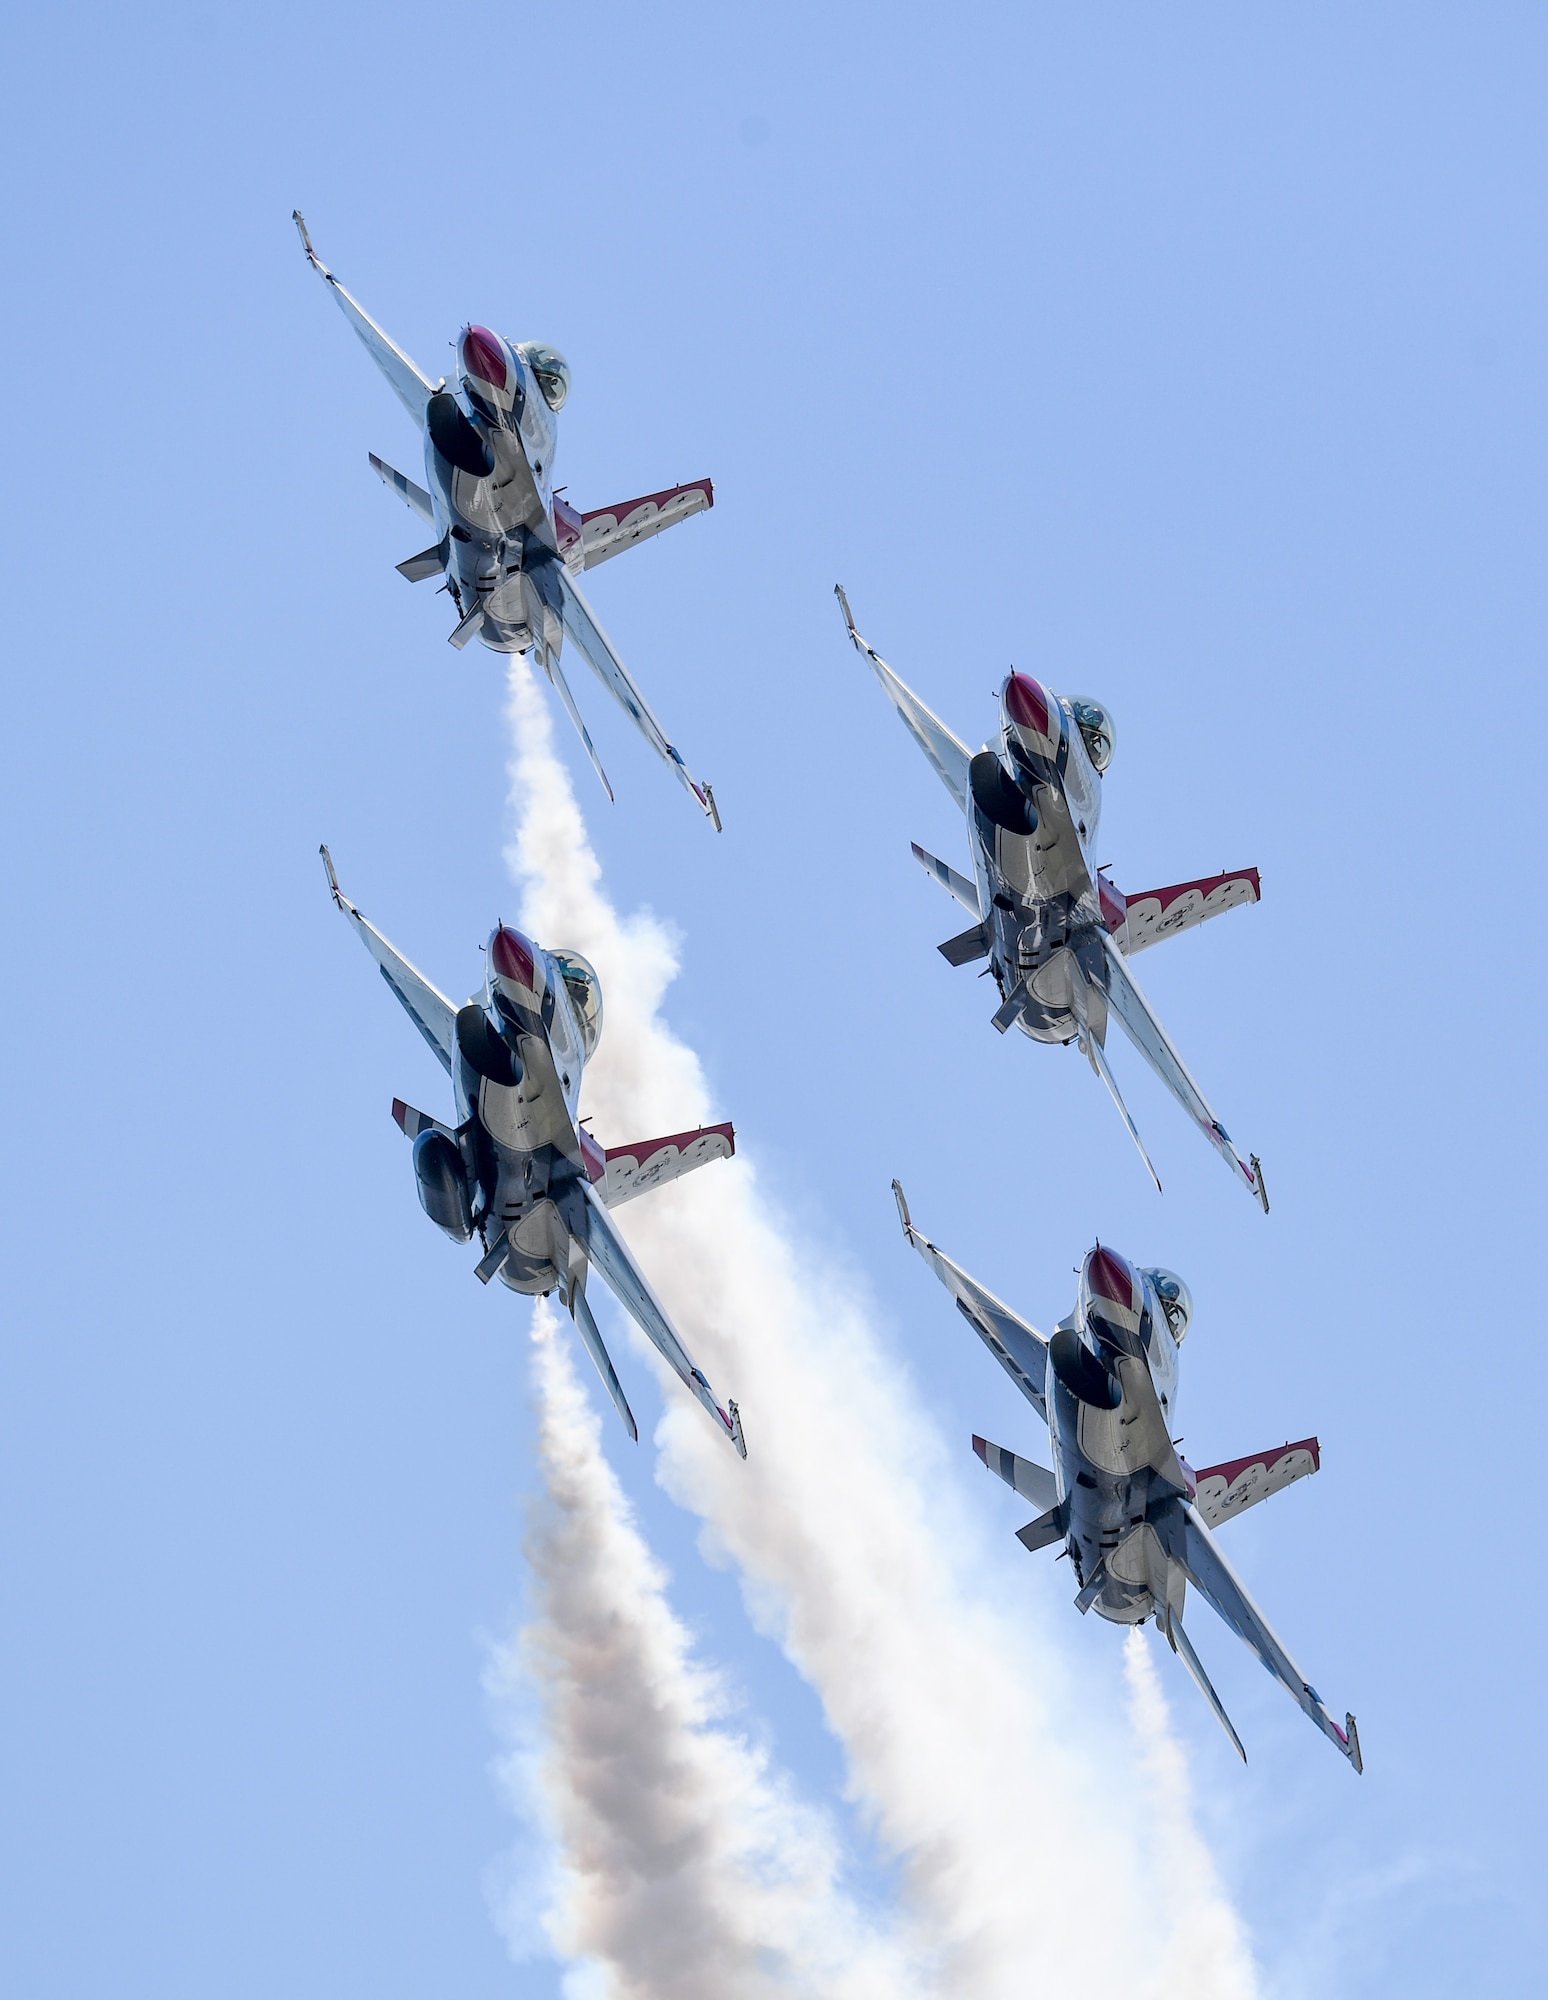 The Thunderbirds fly in diamond formation during a practice session for the 2023 Thunder Over the Sound Air and Space Show at Biloxi Beach in Biloxi, Mississippi, April 28, 2023. Thunder Over the Sound is a unique event where a military installation and its surrounding city jointly host an air show in two locations; Biloxi Beach and Keesler's flightline. (U.S. Air Force photo by Kemberly Groue)